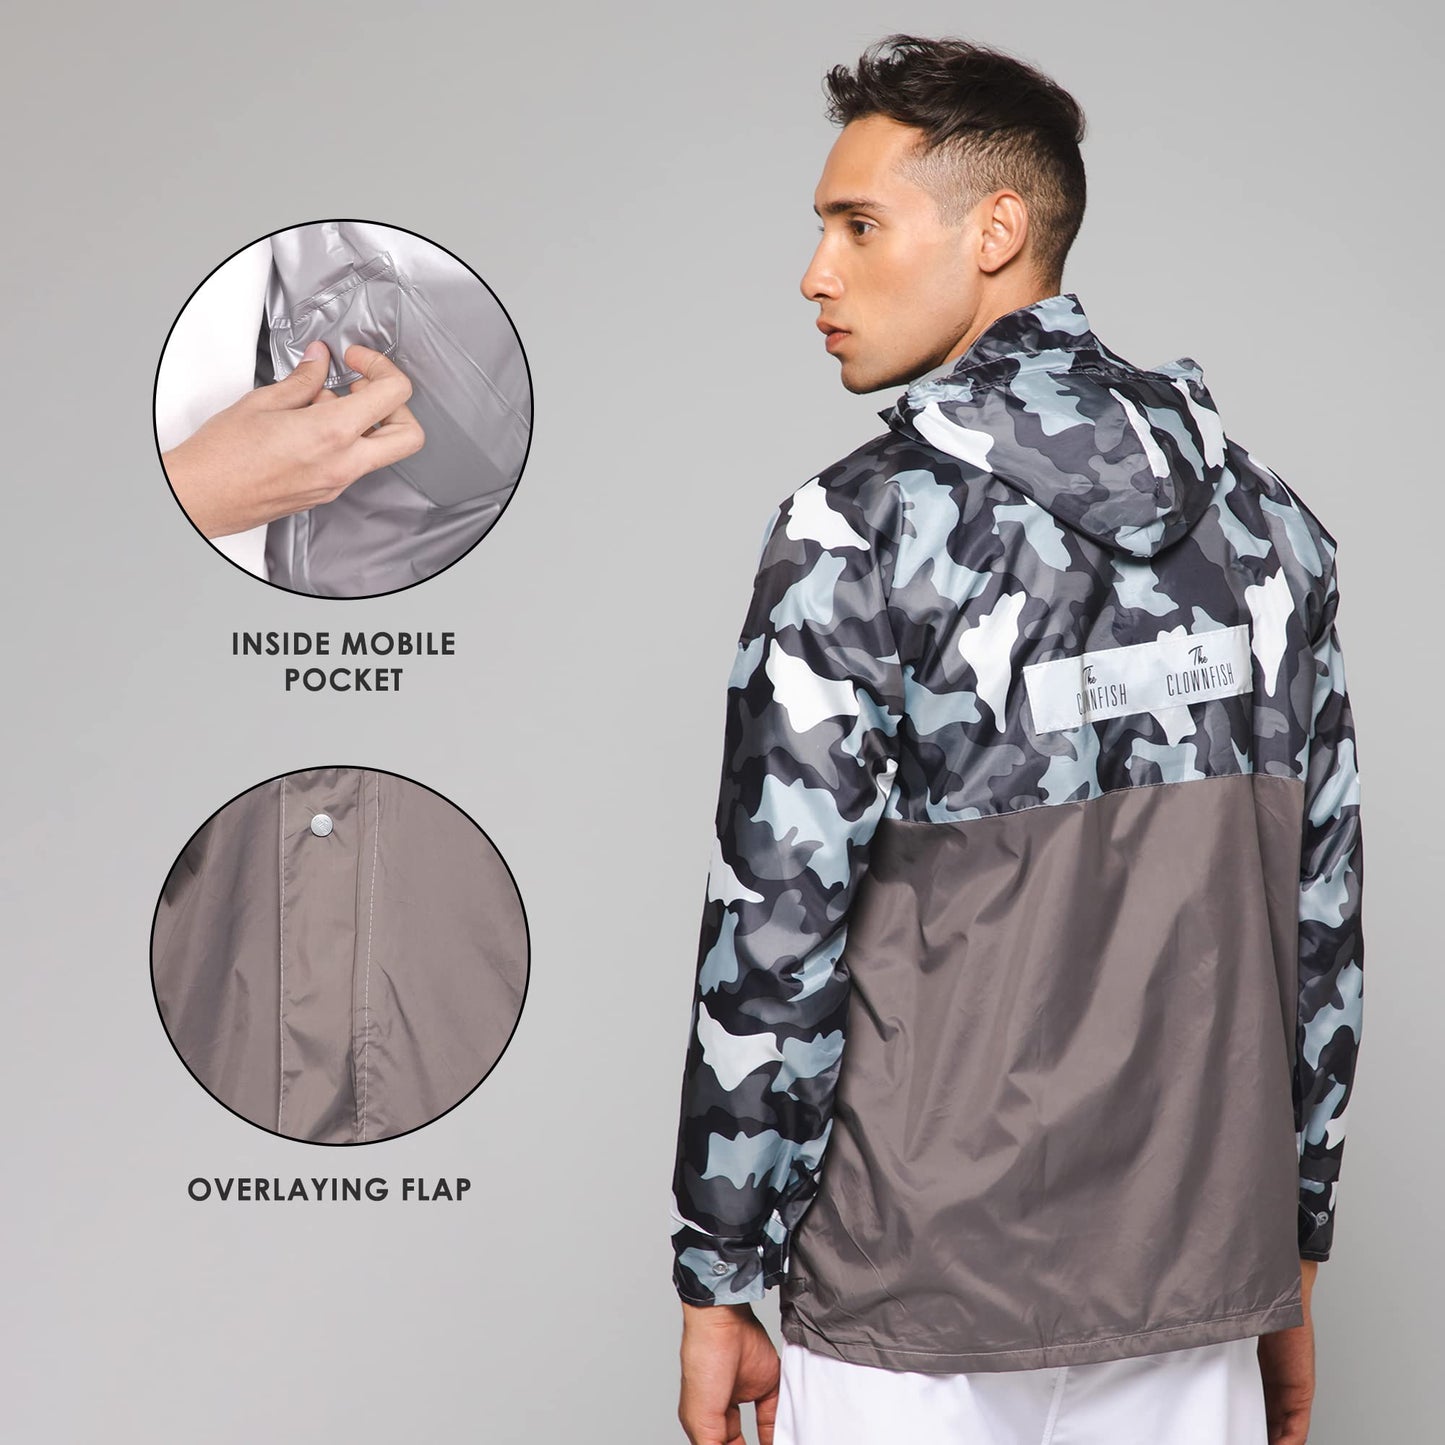 THE CLOWNFISH Napoleon Series Men's Waterproof Nylon Double Coating Reversible Rain Jacket with Hood and Reflector Logo at Back. Printed Plastic Pouch with Rope (Grey, Large)